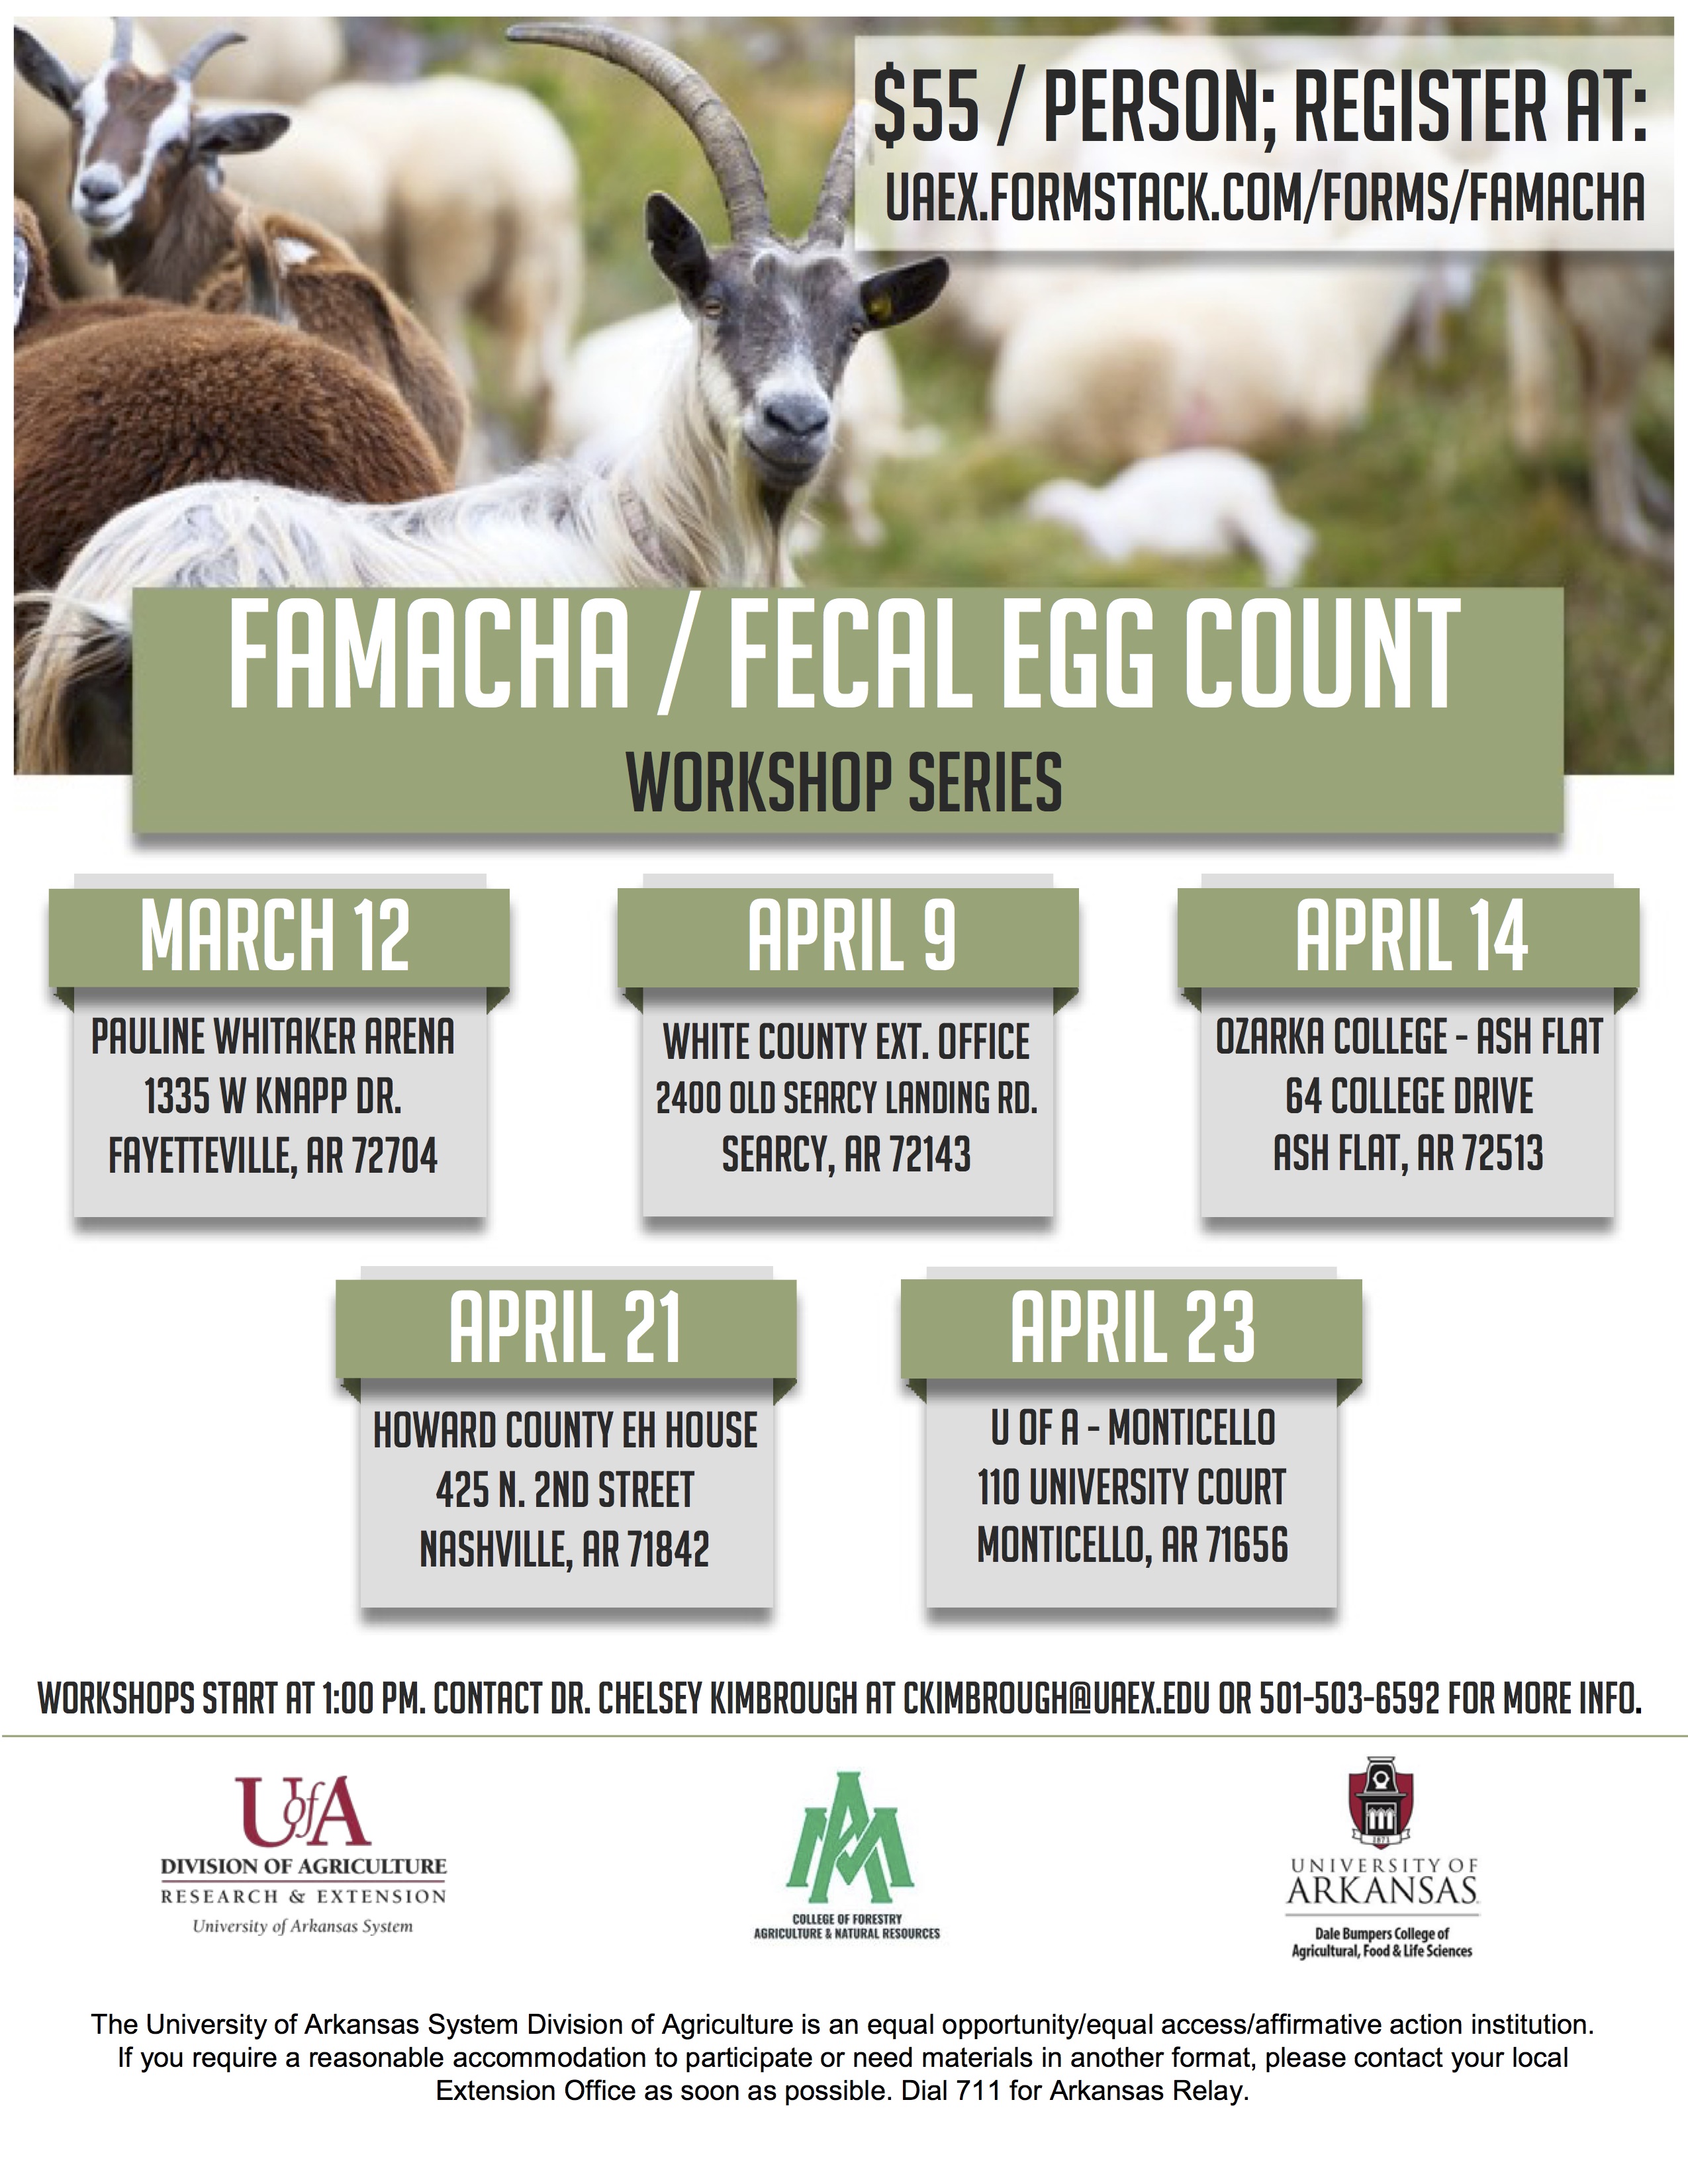 FAMACHA workshop series to help small ruminant producers identify, treat  parasites